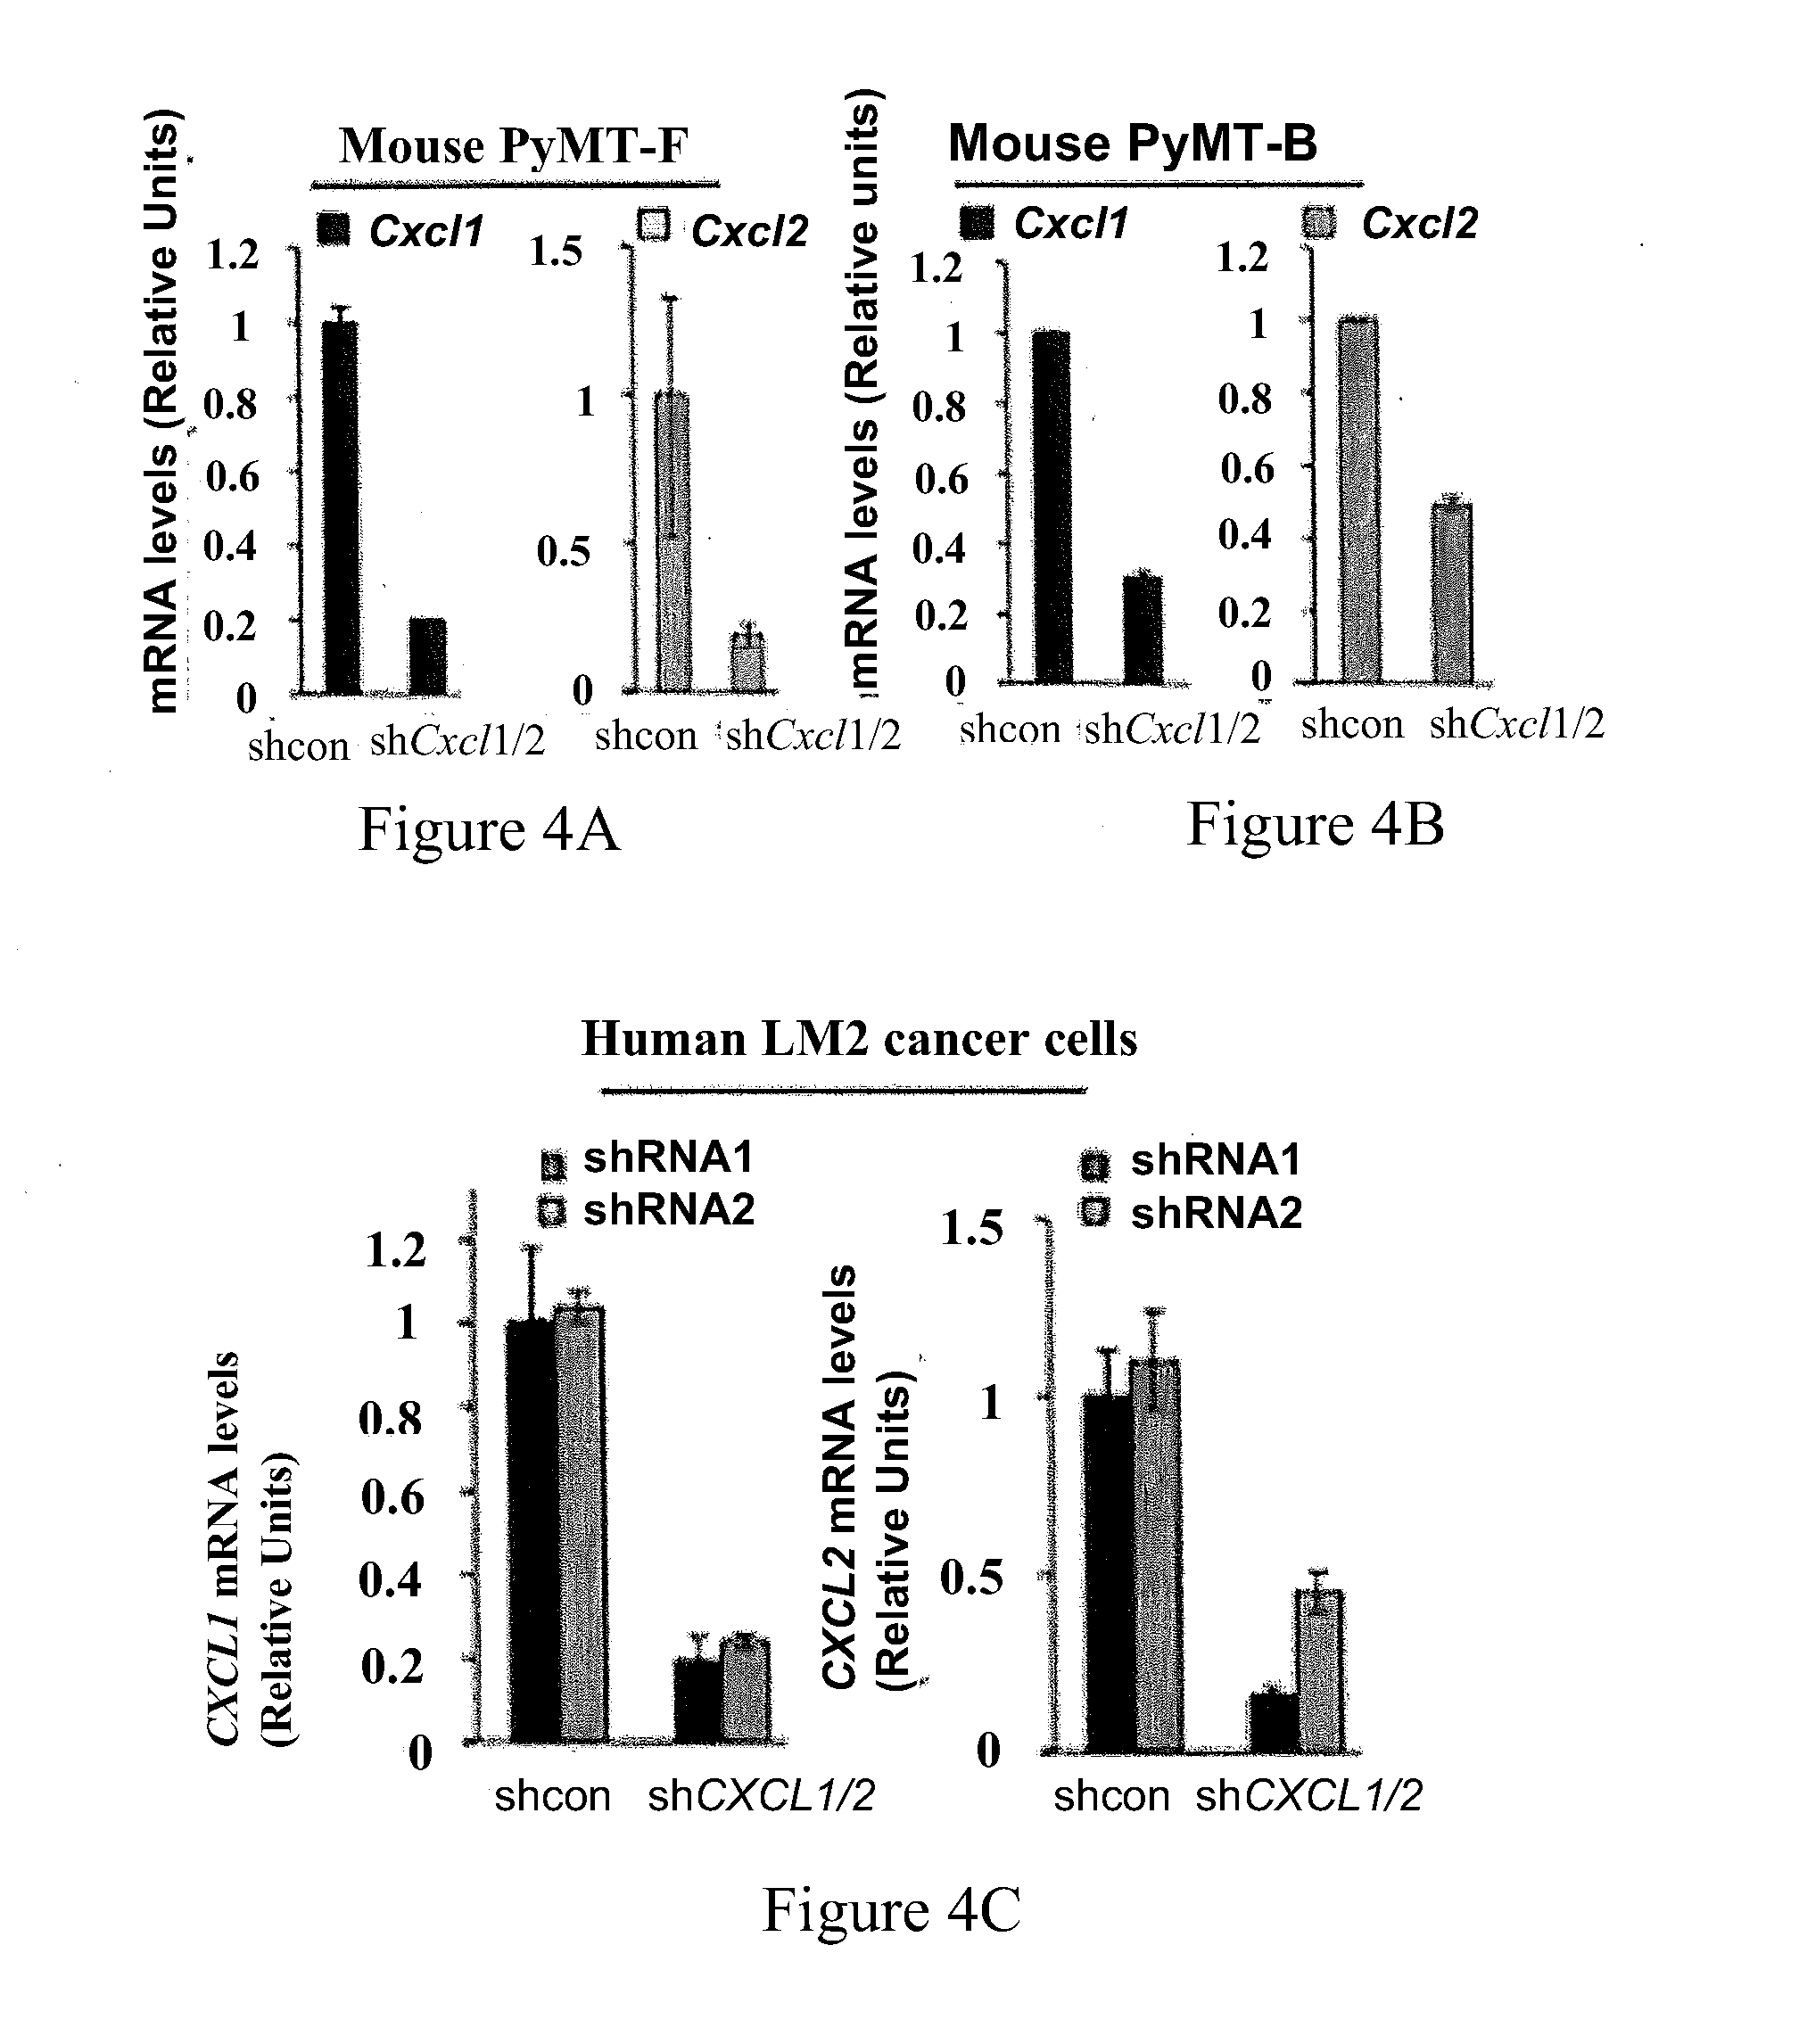 S100A8/A9 as a Diagnostic Marker and a Therapeutic Target